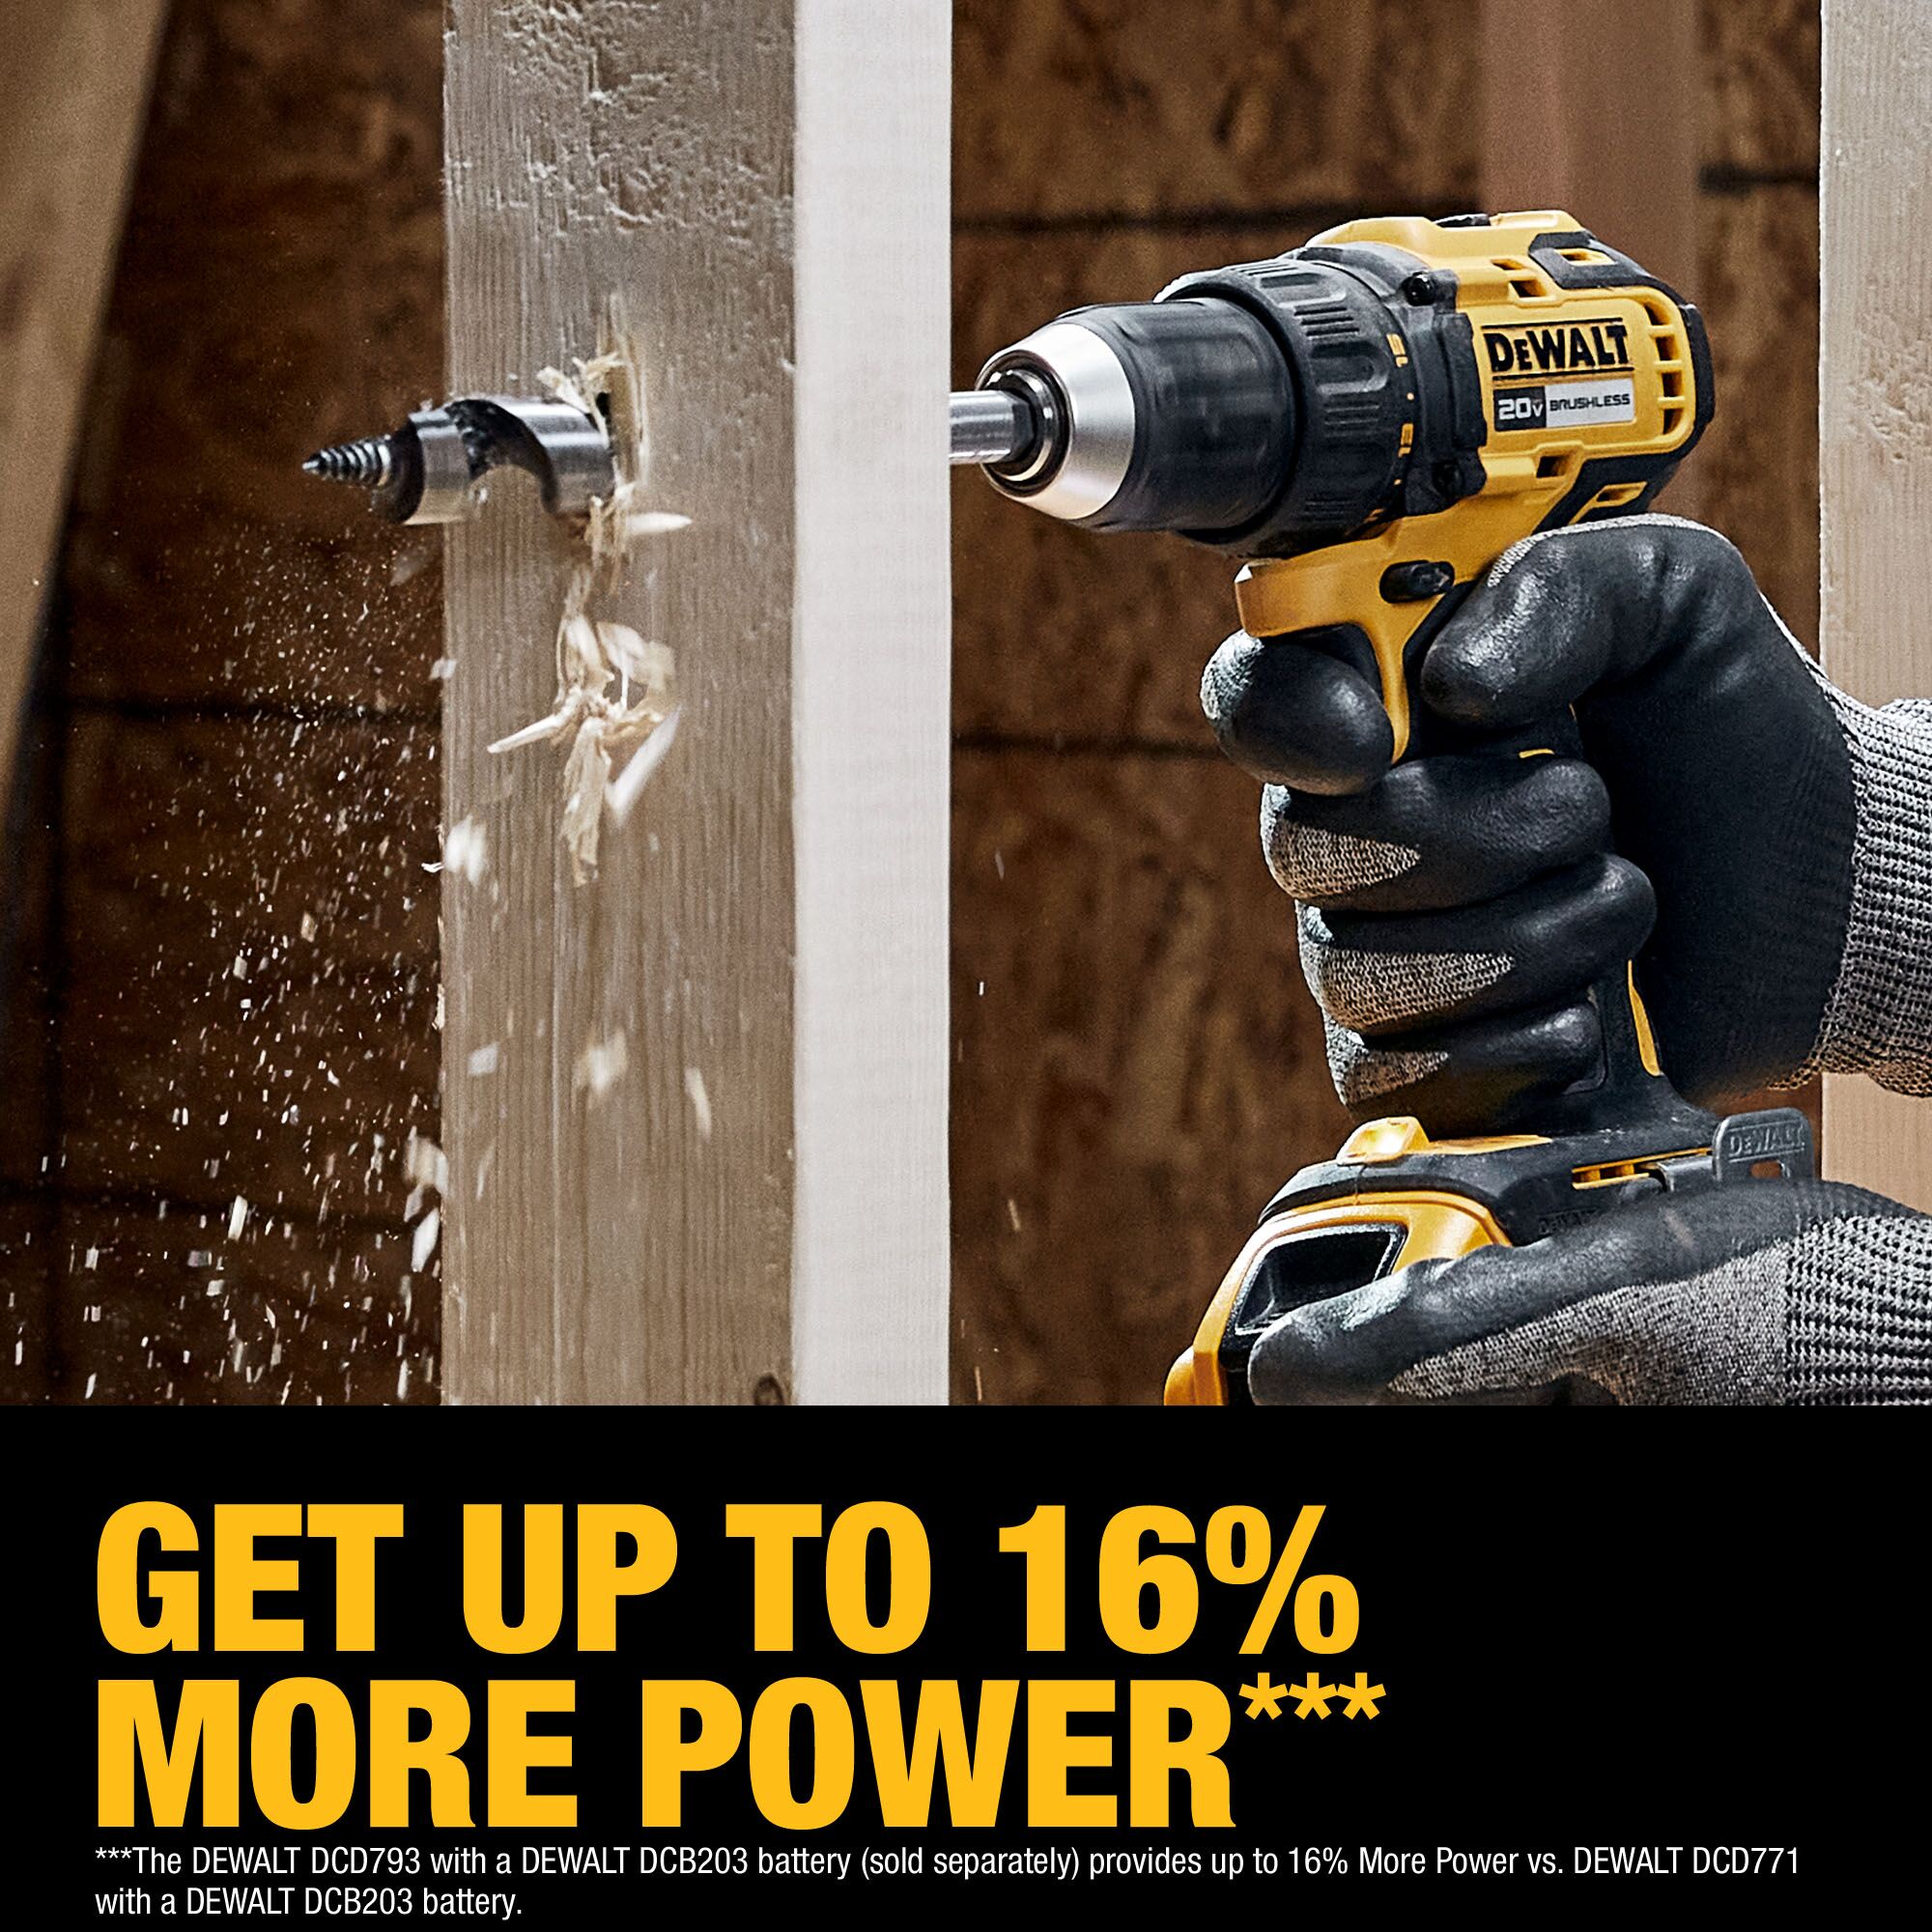 DEWALT 20-volt Max Brushless Drill (1-Battery Included, Charger